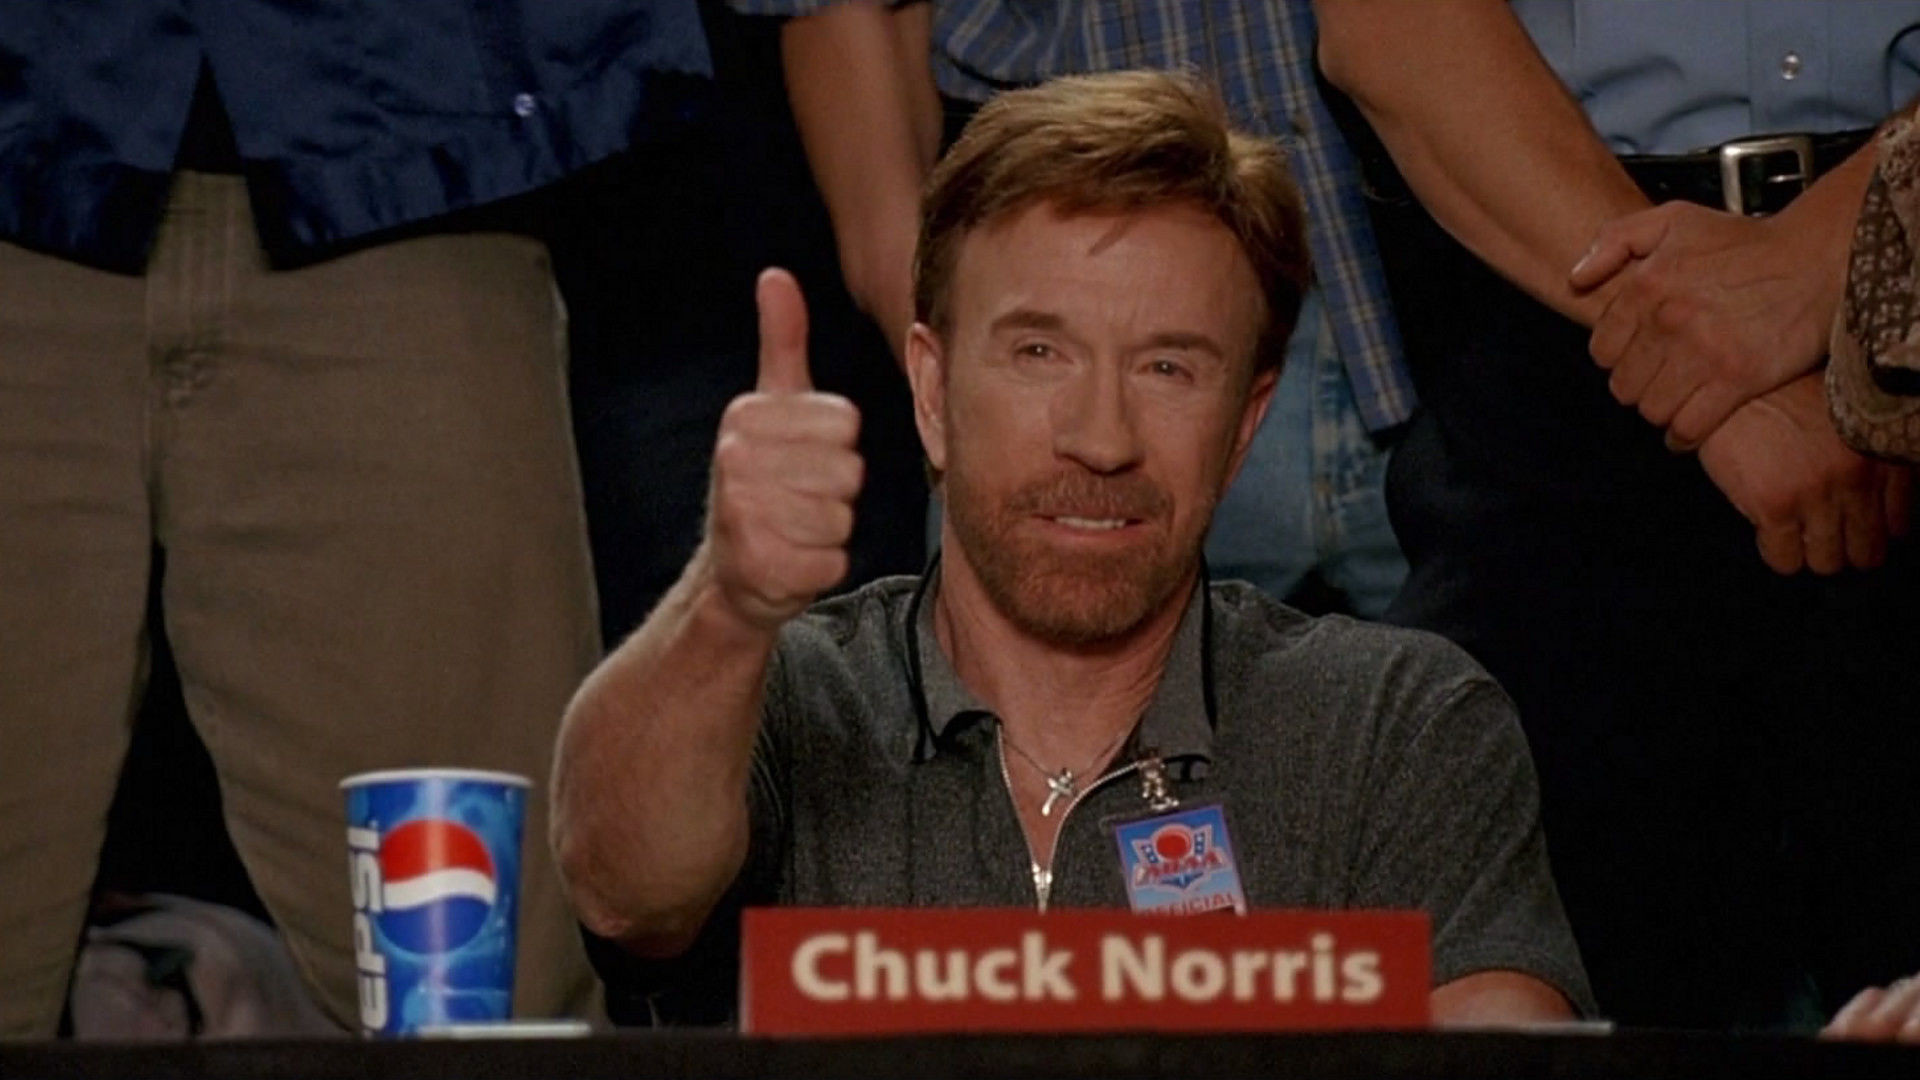 1920x1080 Chuck Norris gives Ted Cruz the thumbs up; they'll appear together Sunday -  The American MirrorThe American Mirror